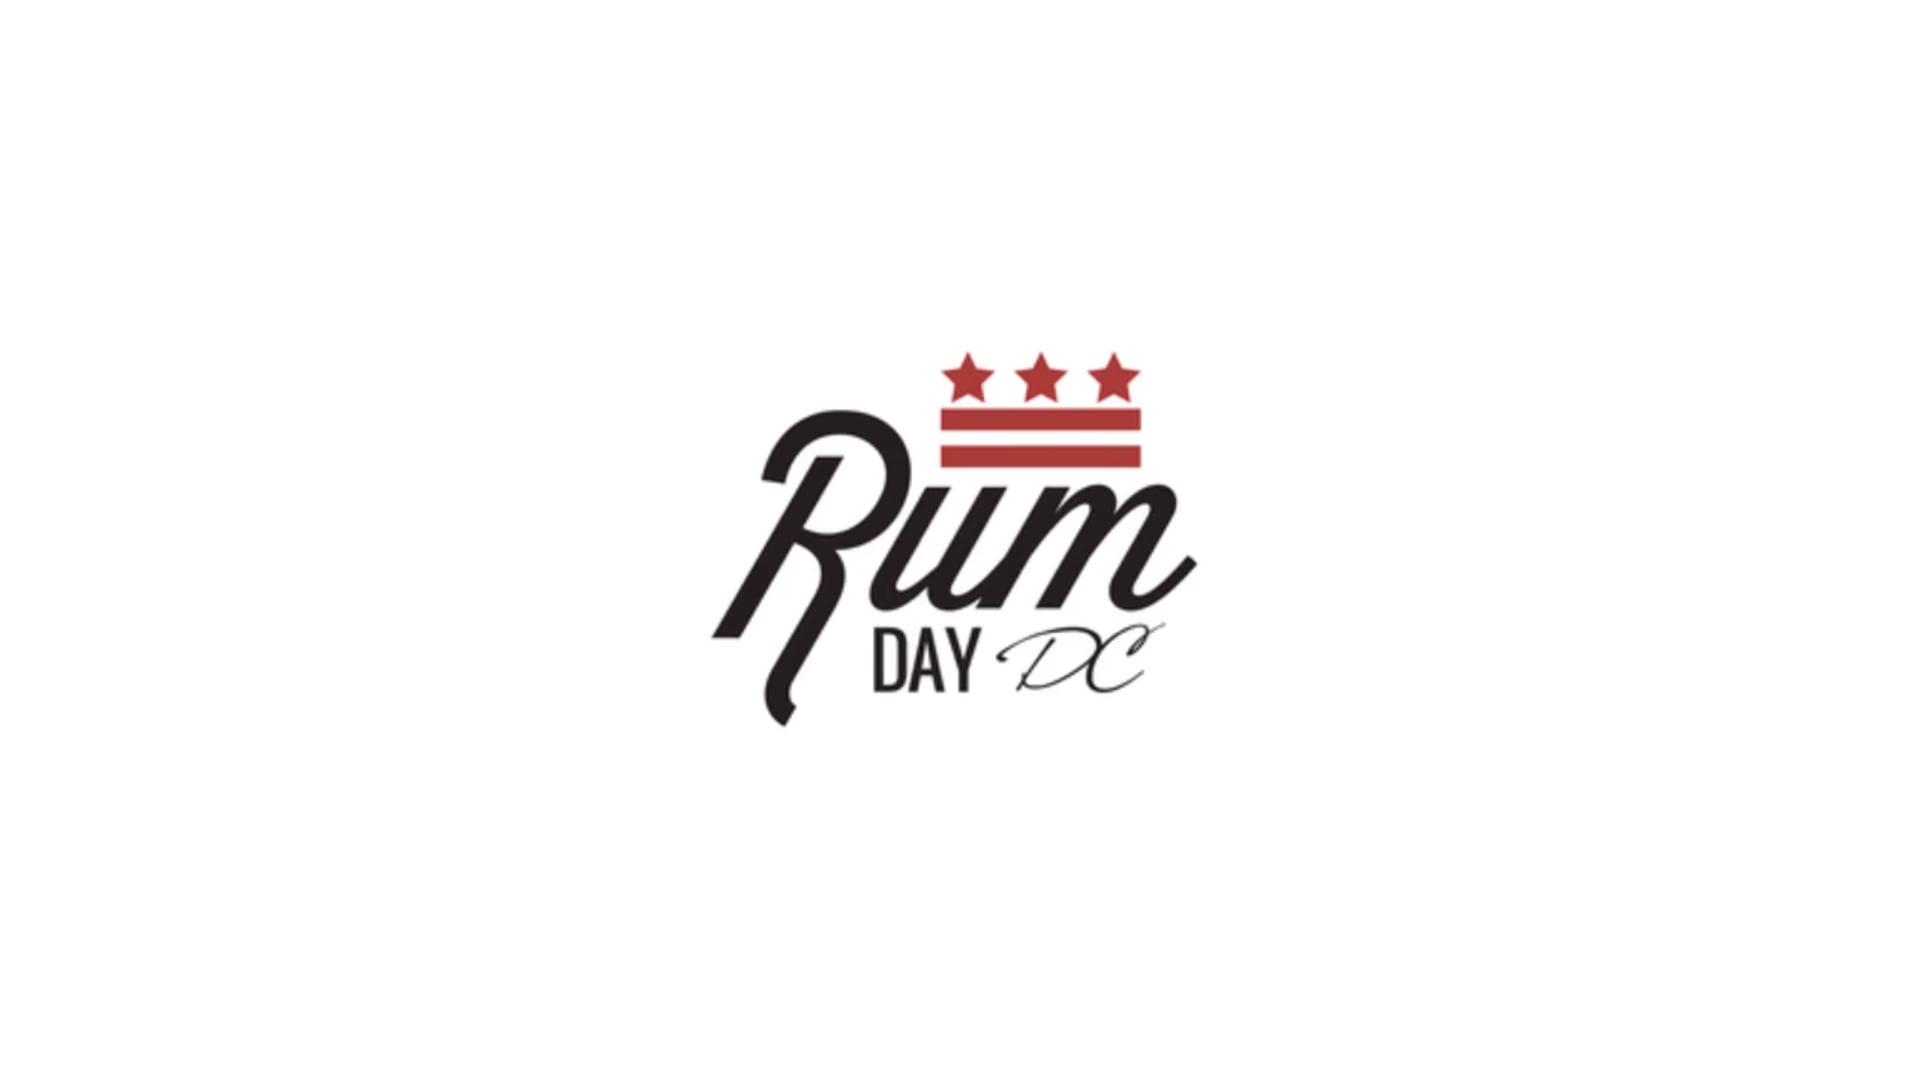 Rum Day DC 2016